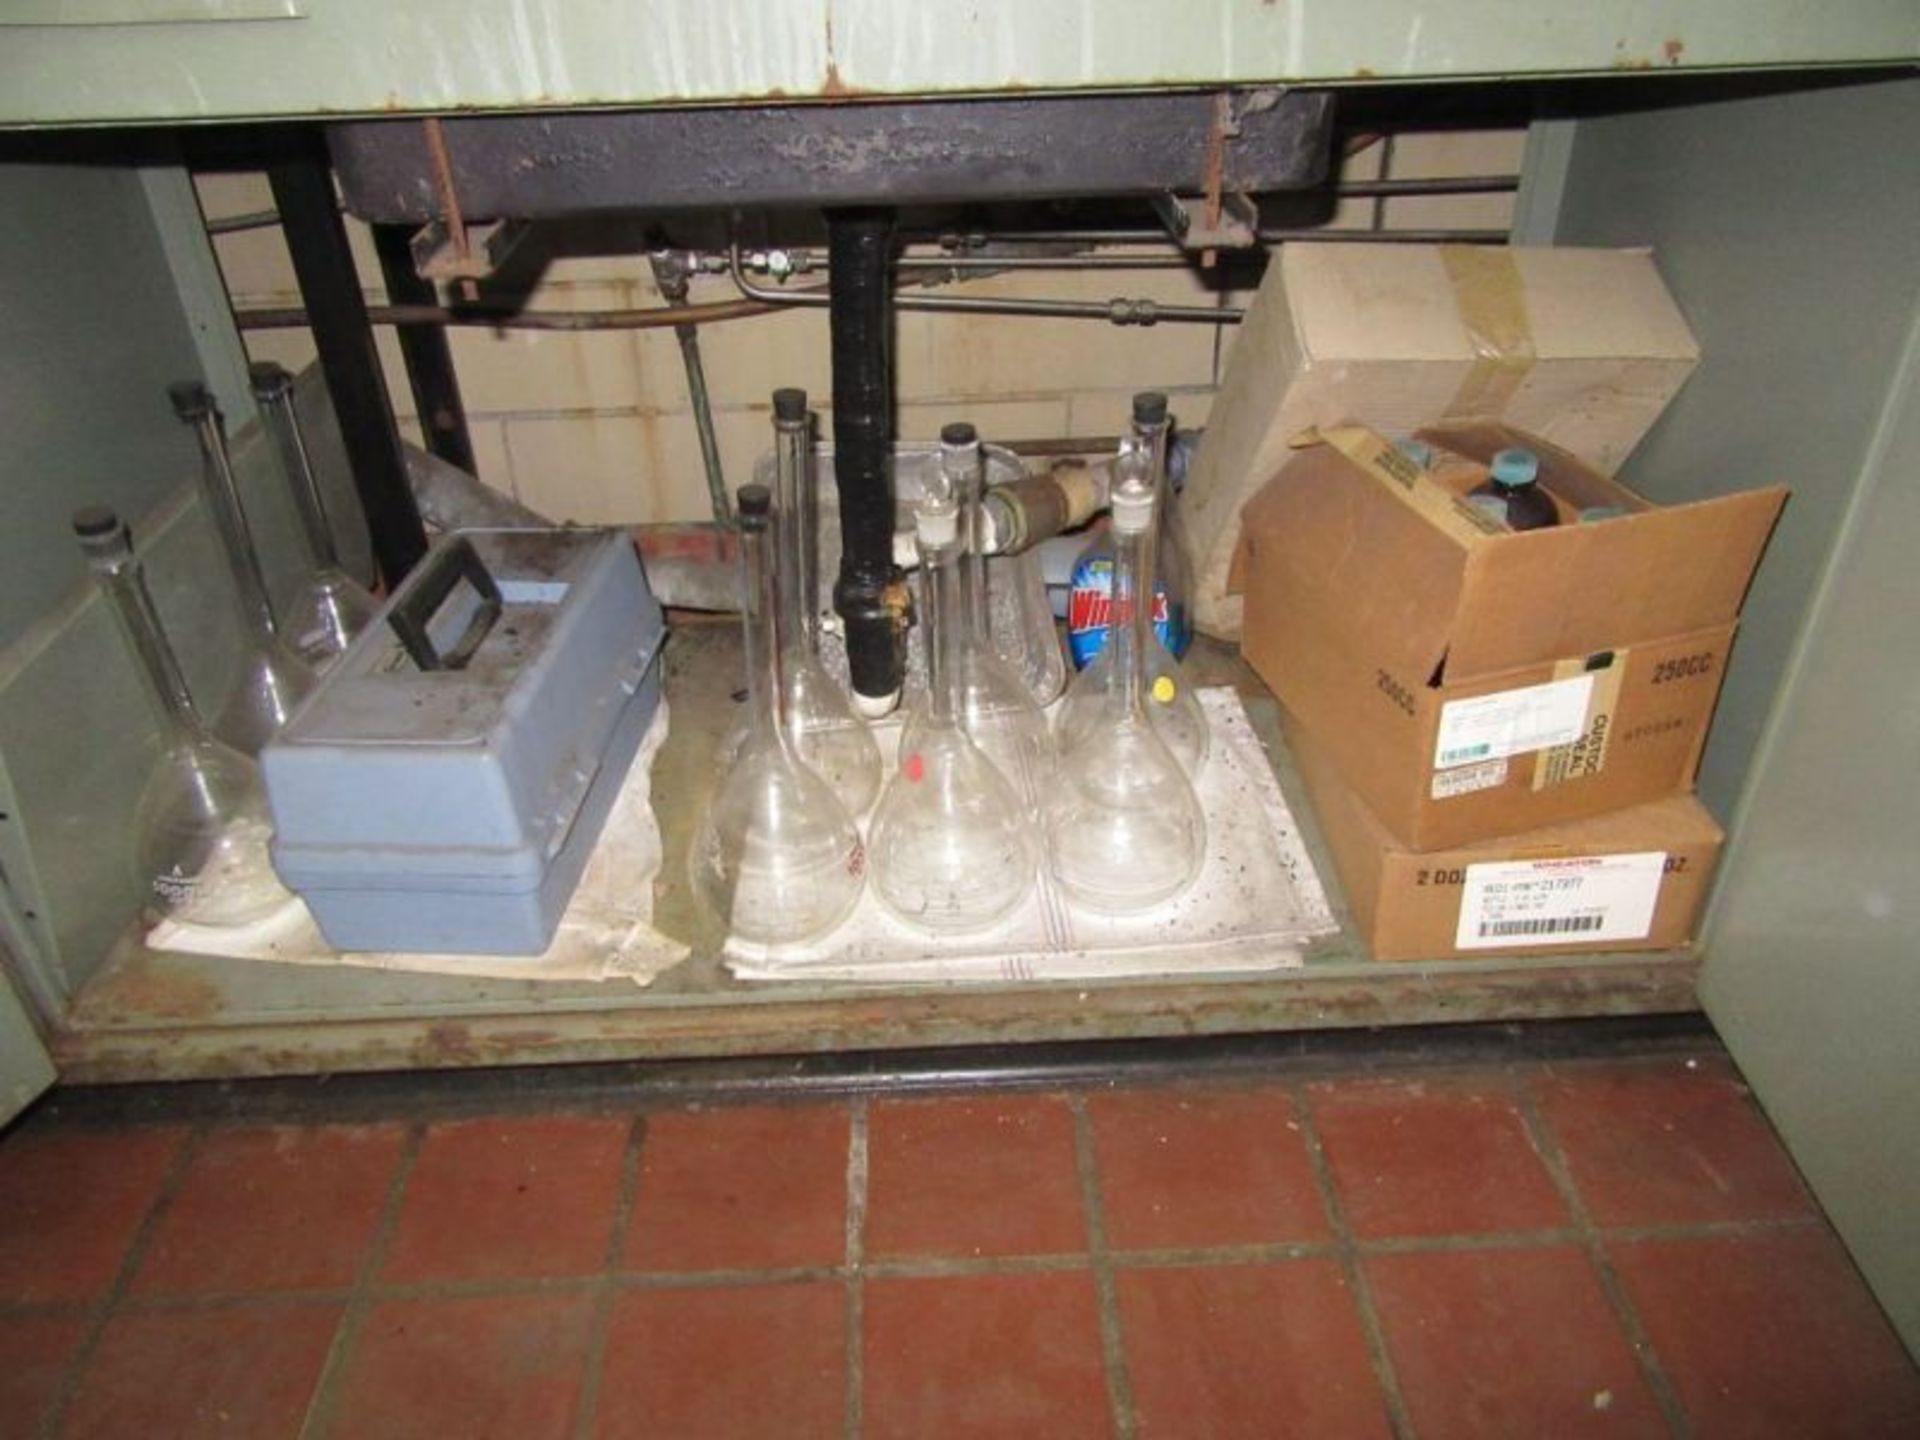 CONTENTS OF CABINETS - TURBIDMETER, GLASS BEAKERS, FLASKS, ETC - Image 5 of 15